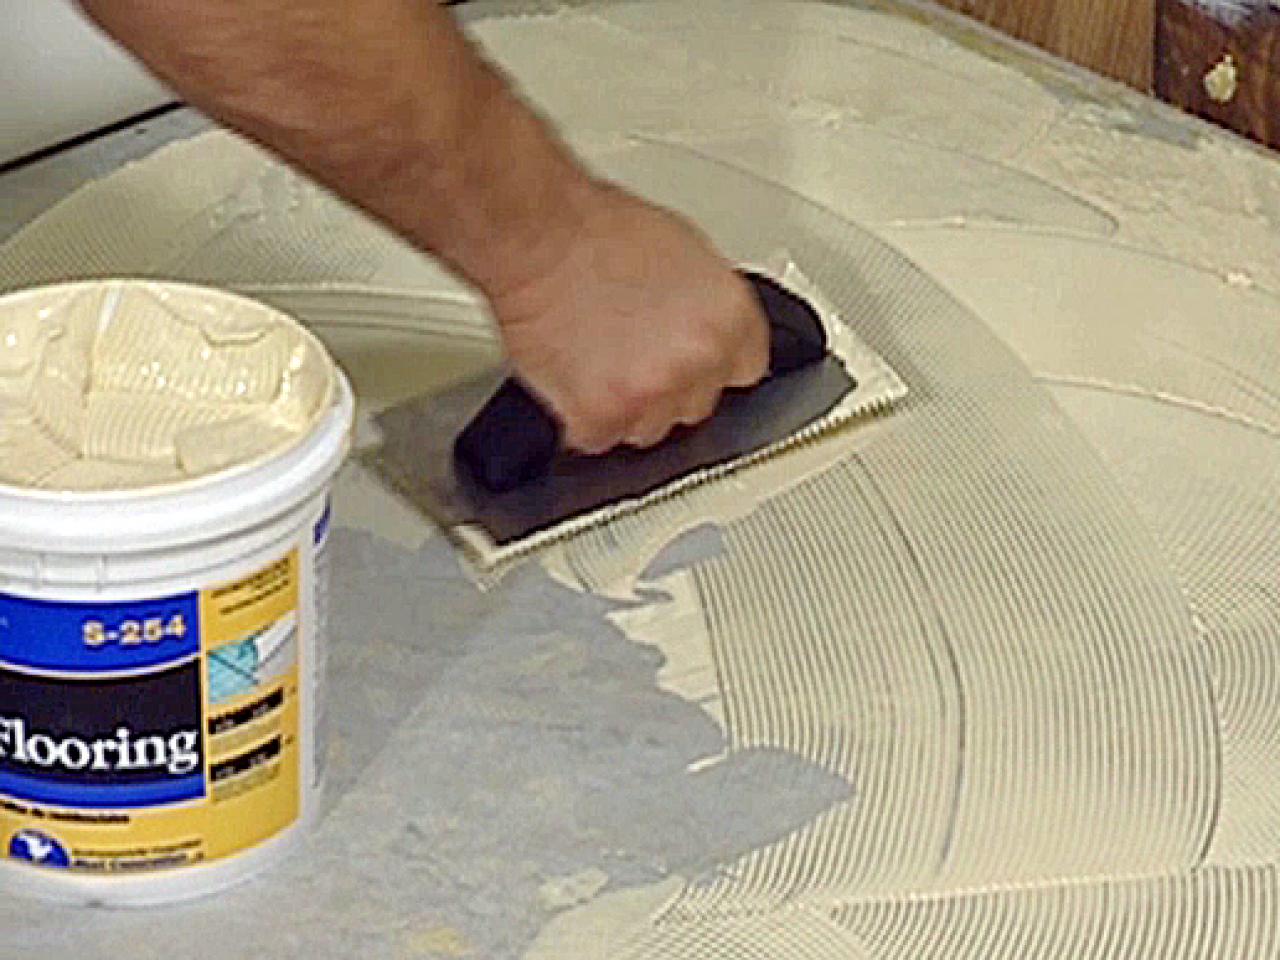 How To Remove And Add Vinyl Flooring, How To Remove Glue From Vinyl Flooring